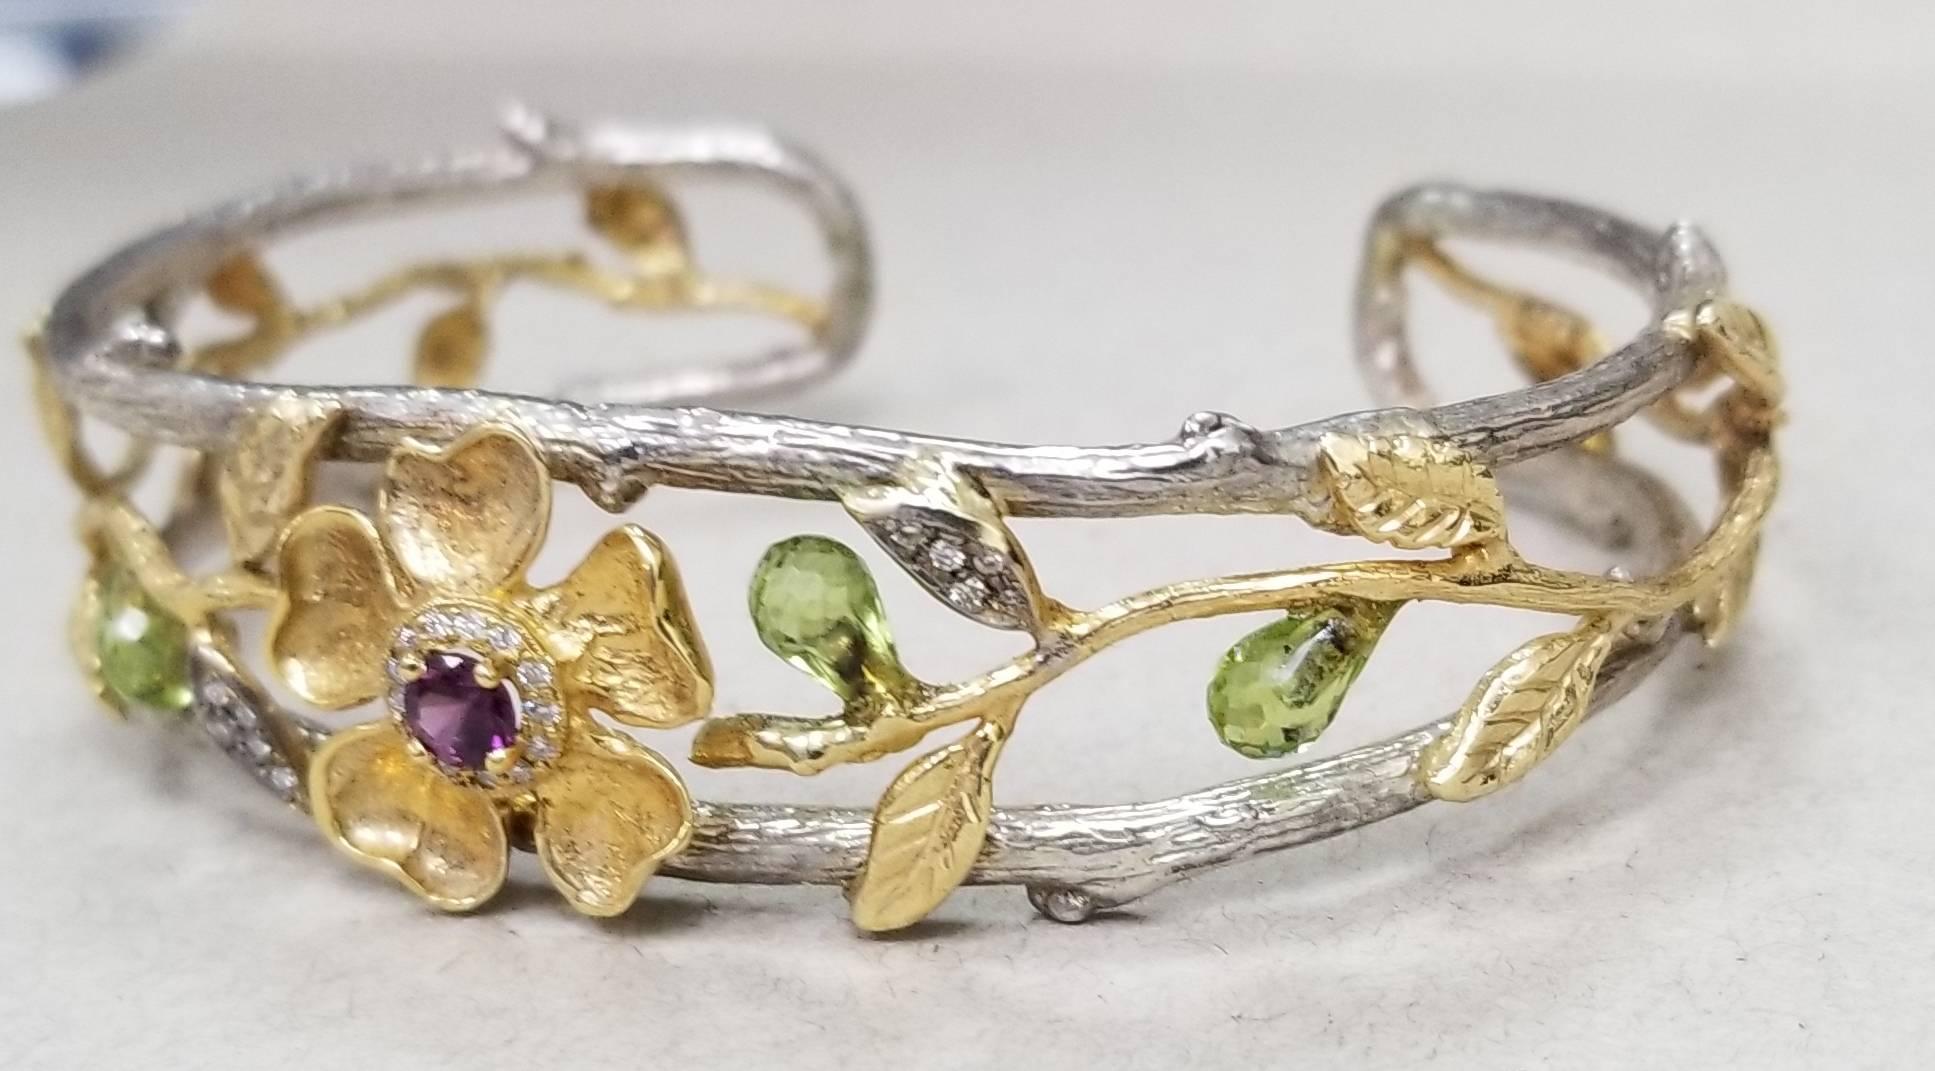 18k yellow gold flower and vine, with 1 round pink tourmaline weighing .33pts. and 23 round diamonds weighing .20pts, accented by 3 tear drop briolette cut peridot weighing 2.25cts.   The 